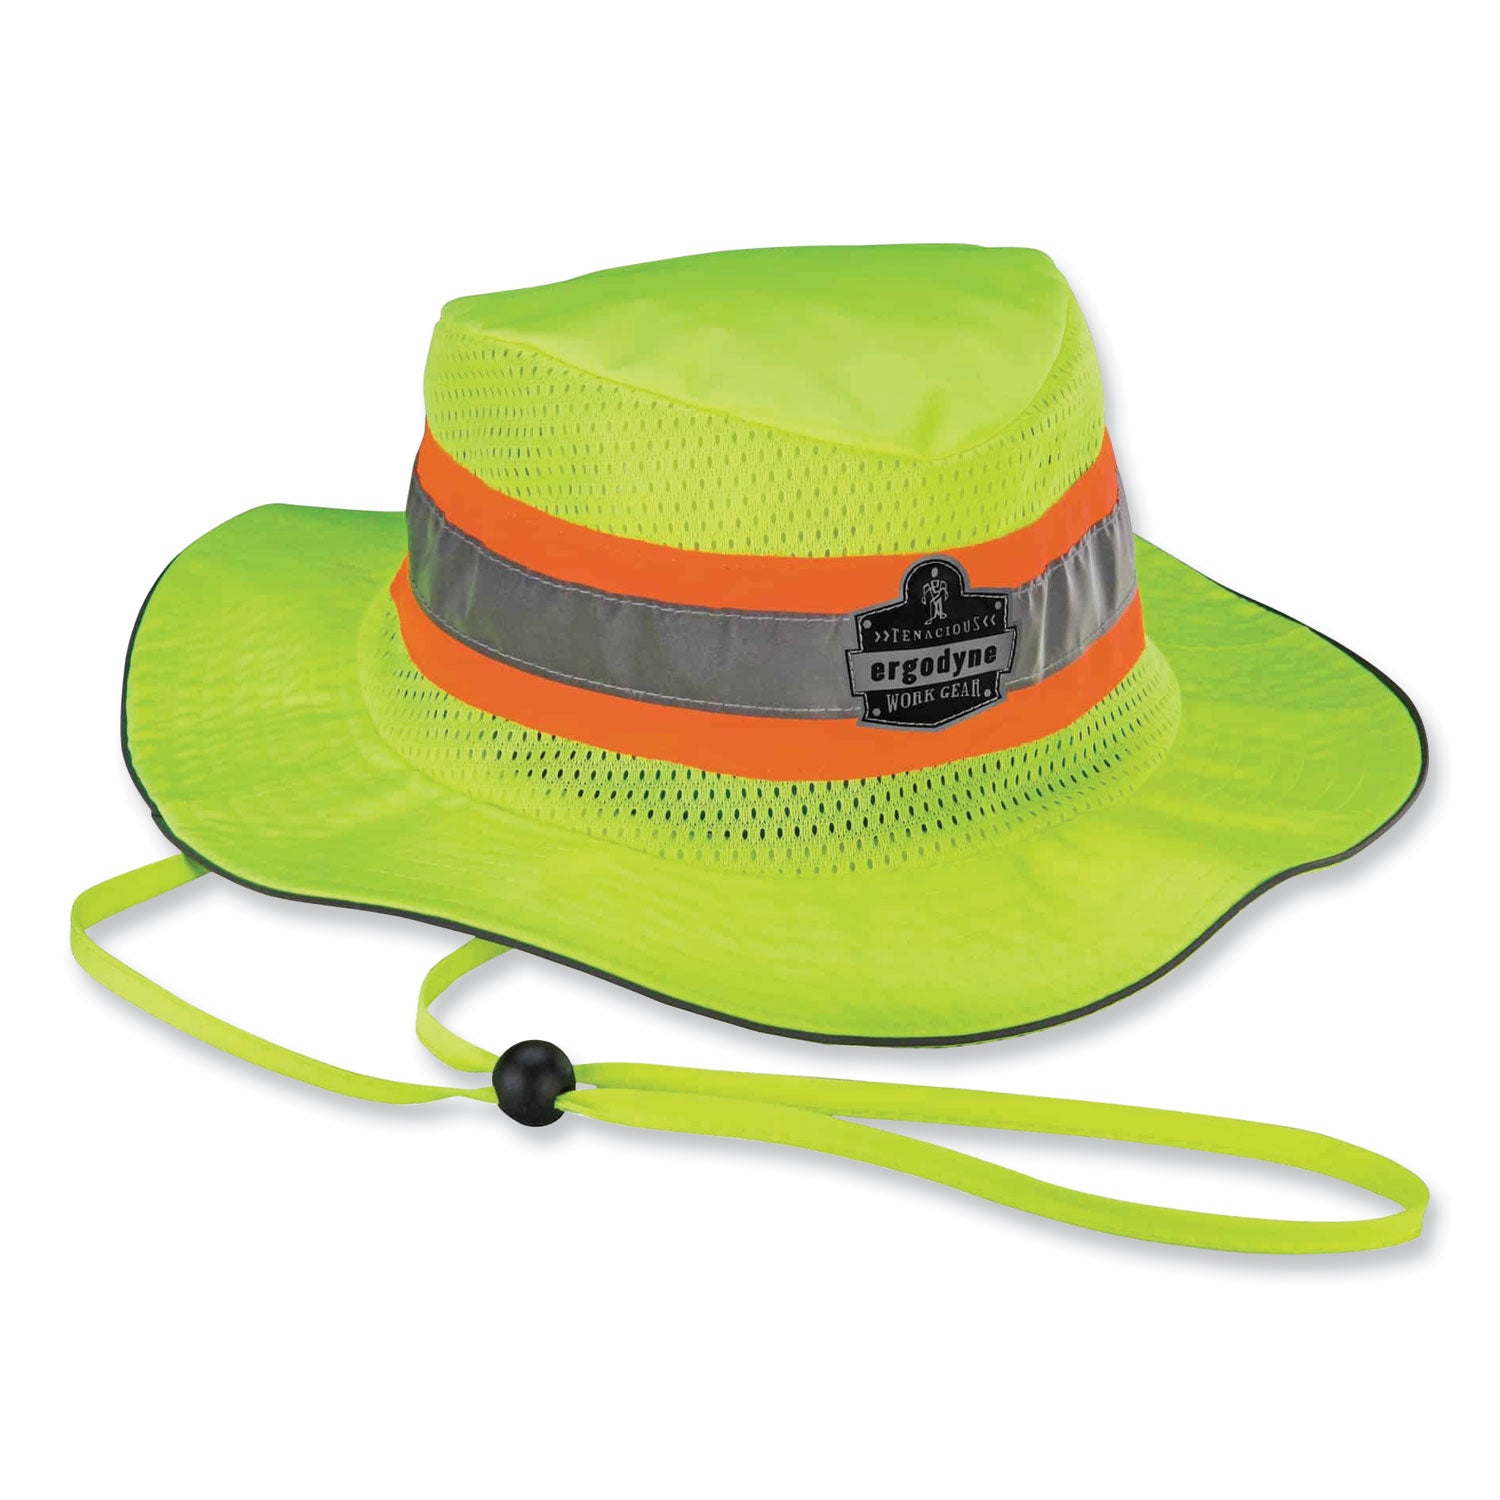 chill-its-8935mf-hi-vis-microfiber-ranger-sun-hat-small-medium-lime-ships-in-1-3-business-days_ego12593 - 1